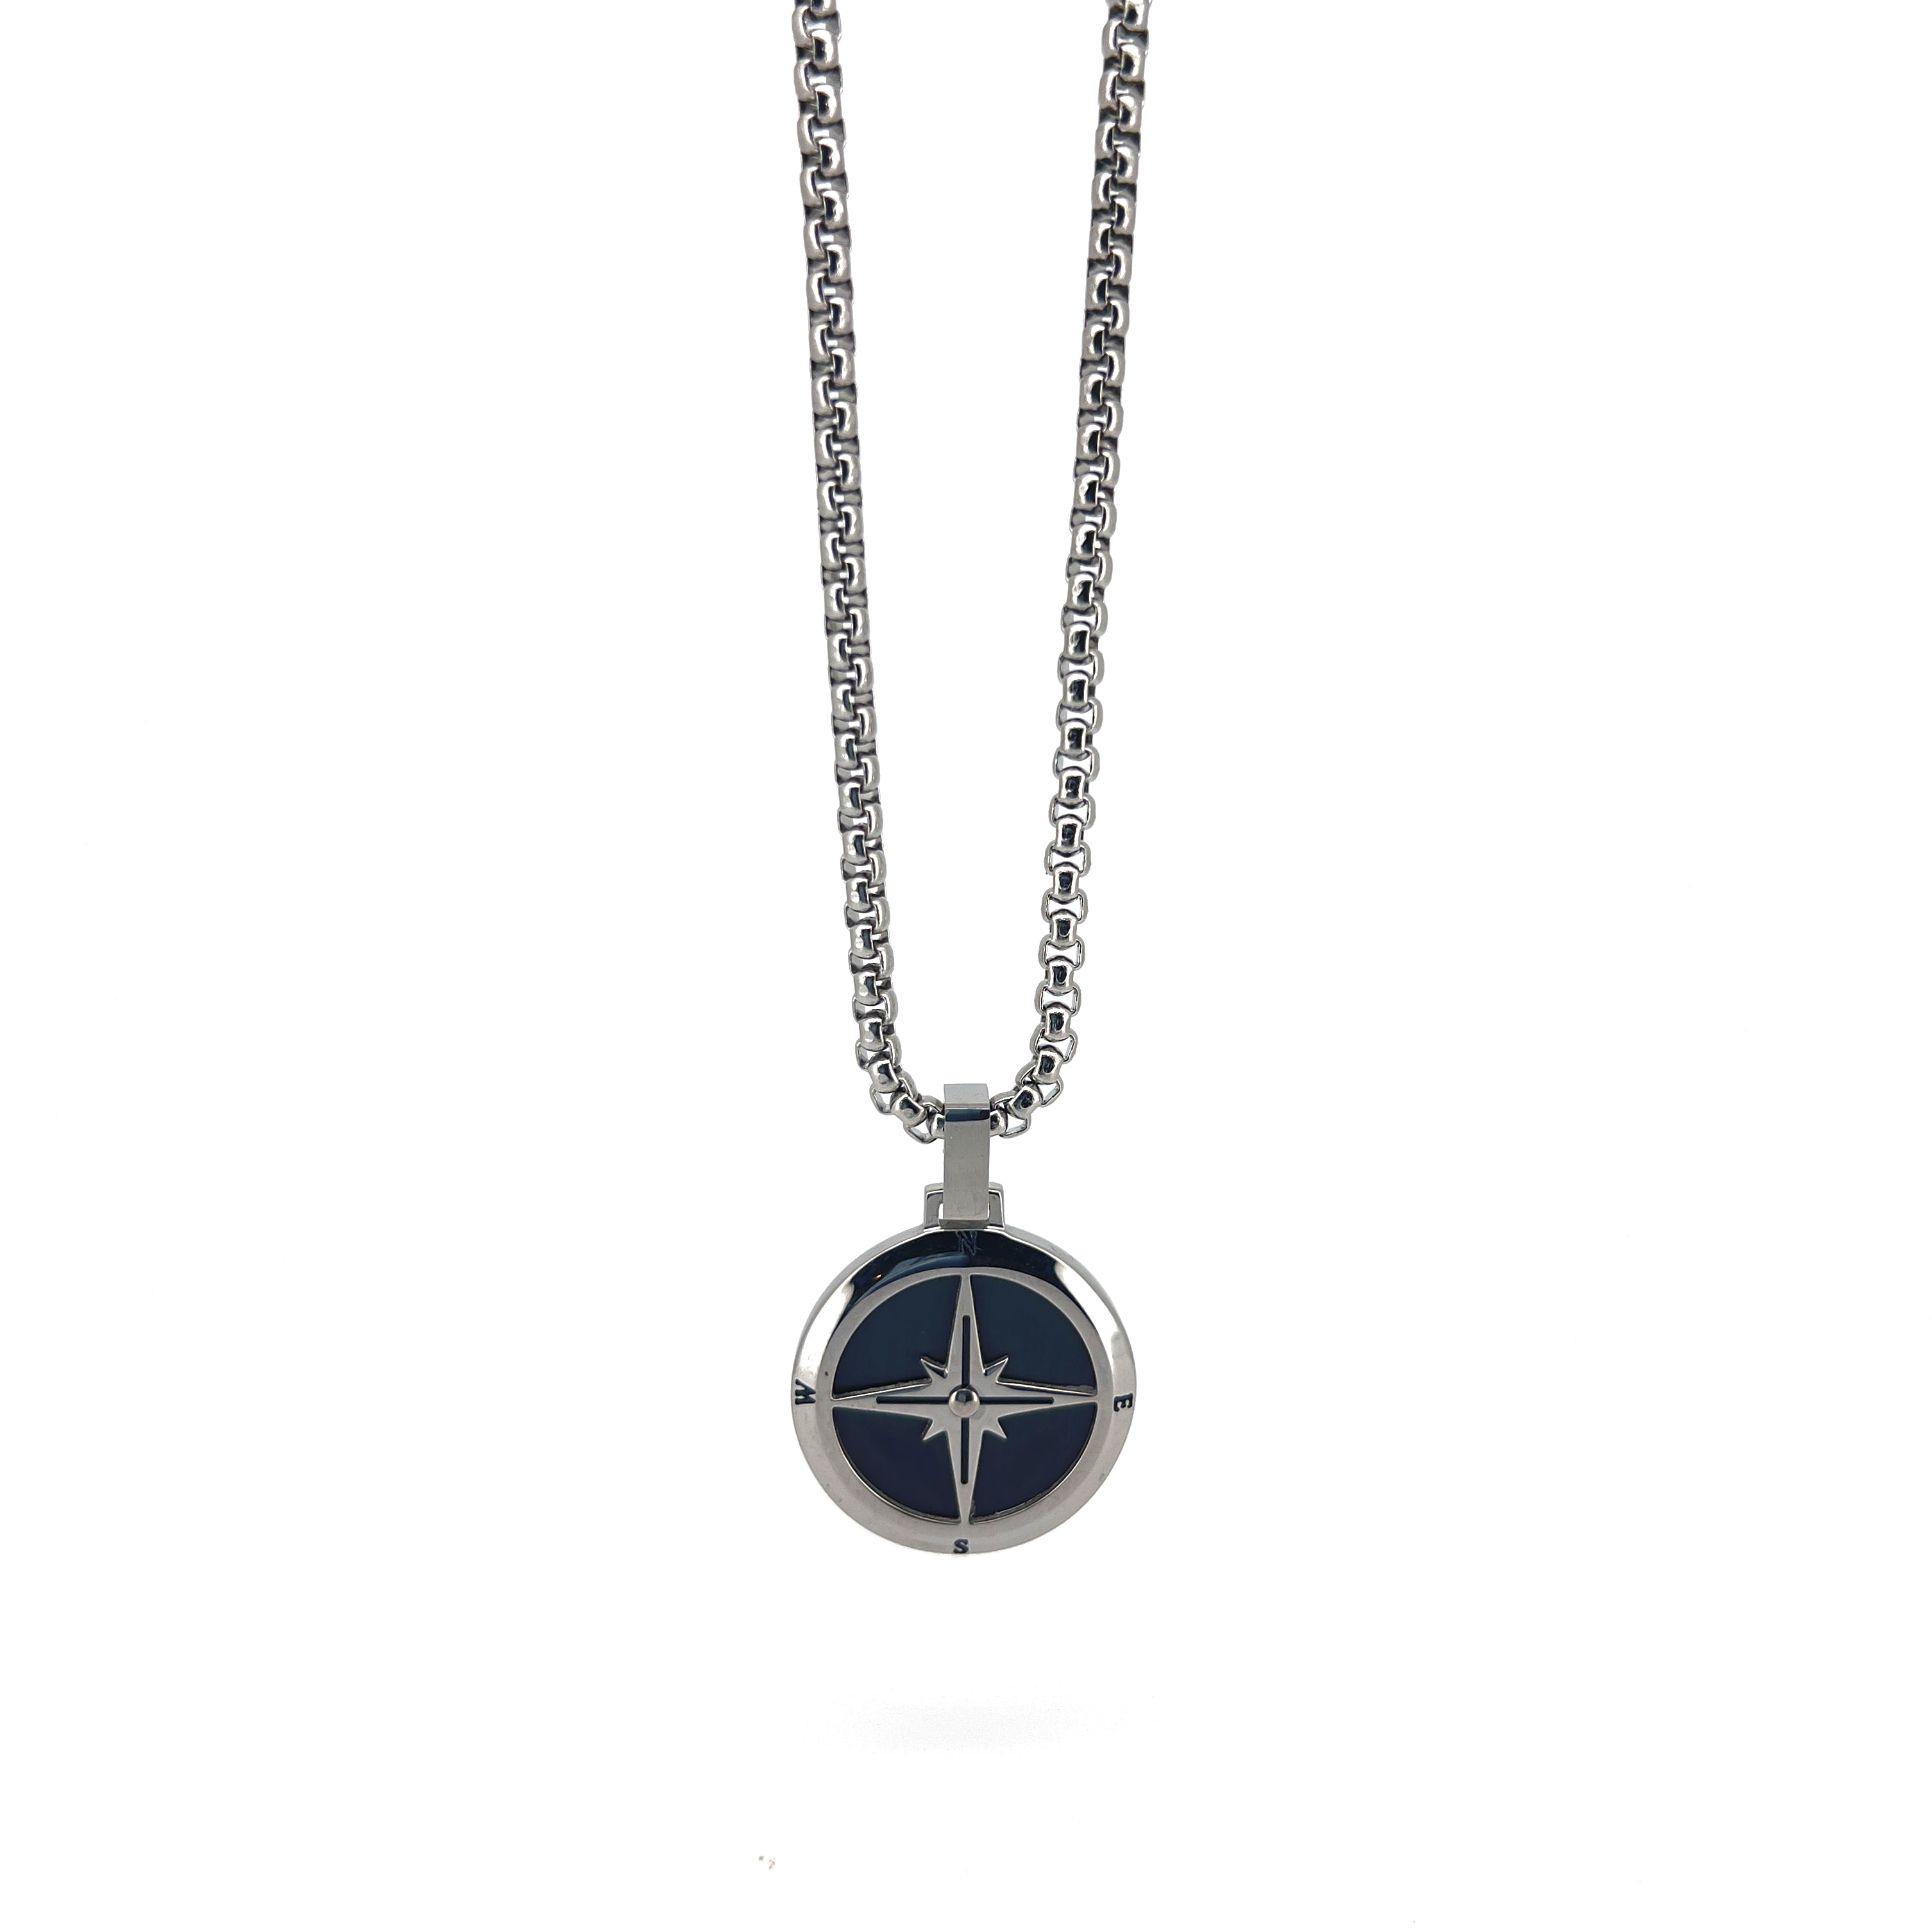 Cleanto Stainless Steel Chain Necklace with Compass Pendant